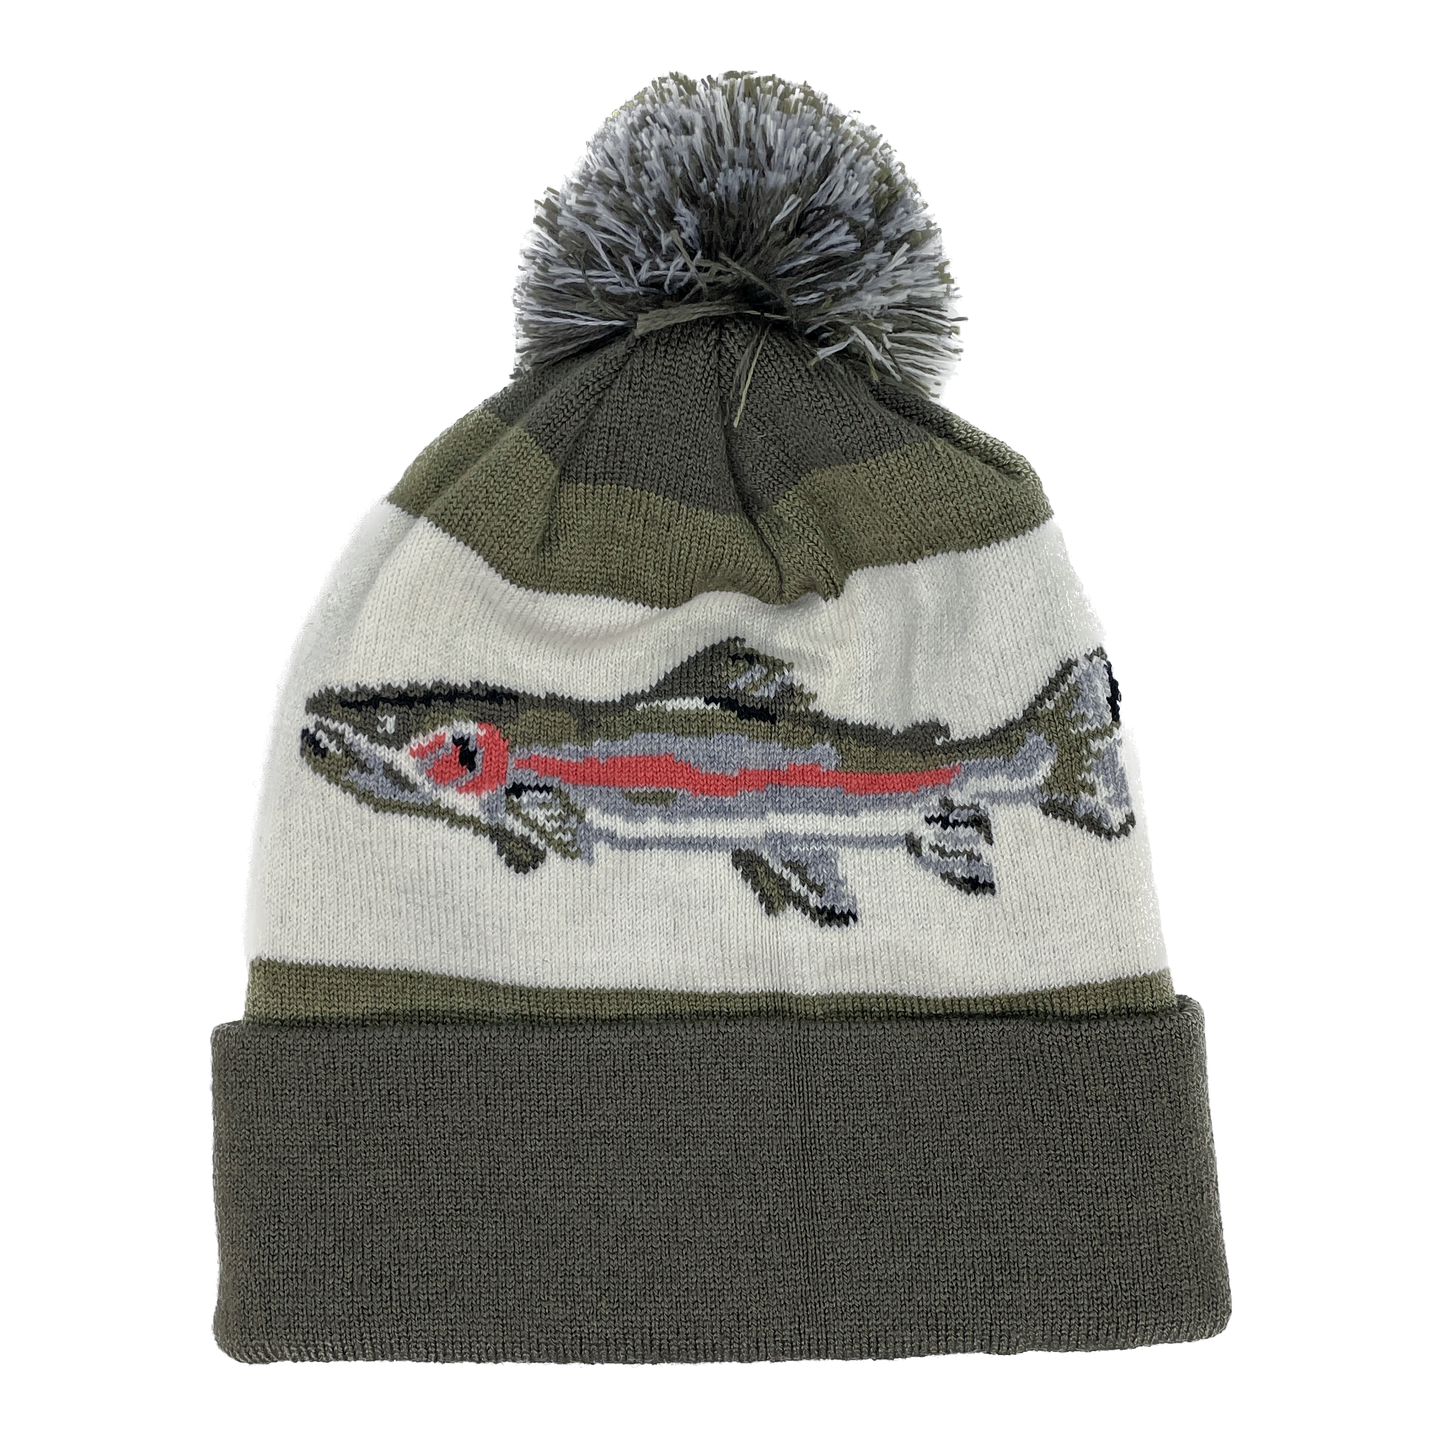 A winter hat with a gray cuff featuring a rainbow trout on the main area and a gray poof on top